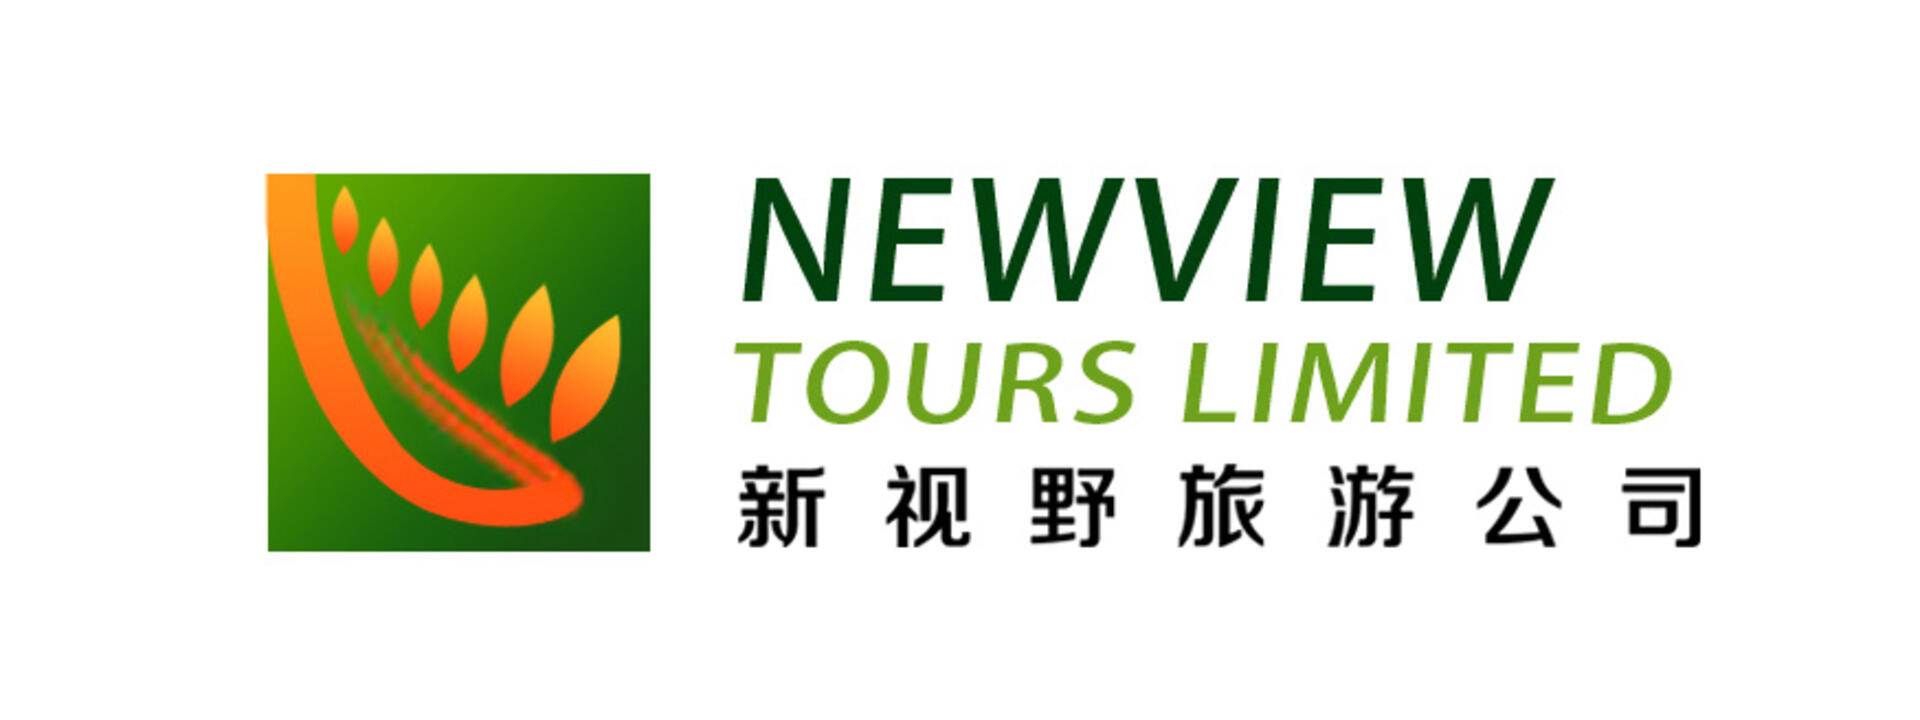 Logo: Newview Tours Limited